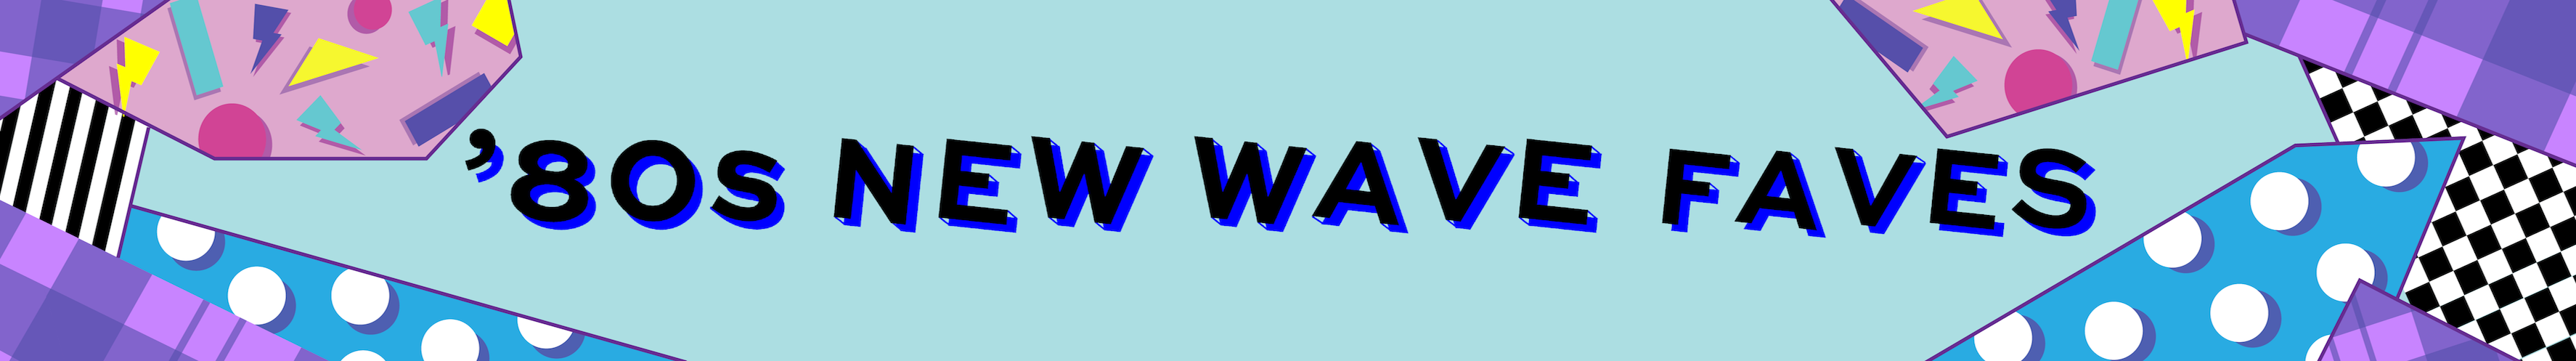 Playlist 80s New Wave Faves